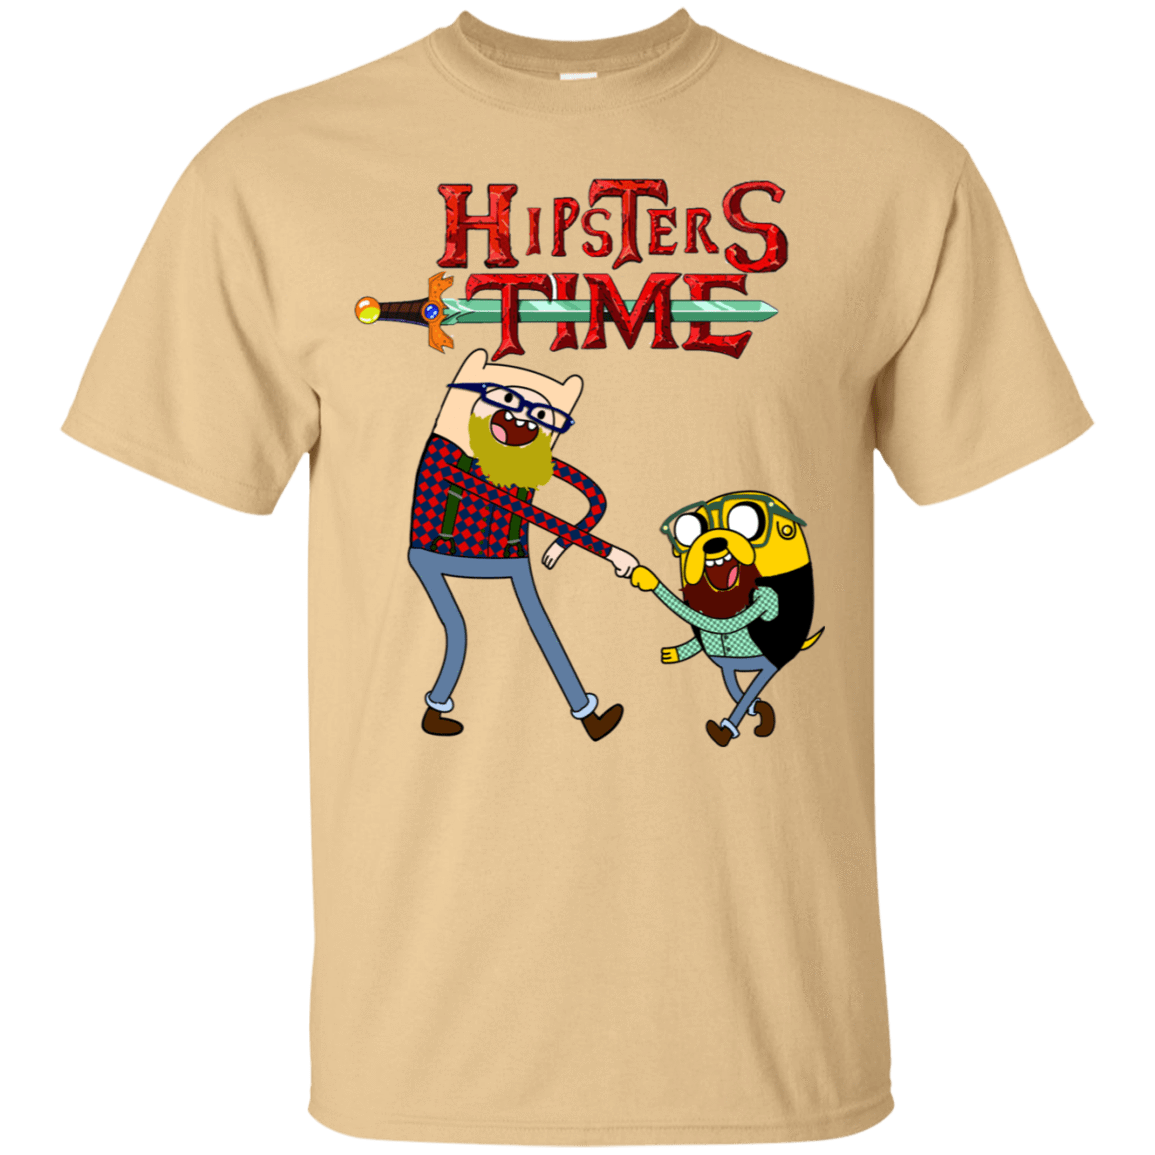 T-Shirts Vegas Gold / S Hipsters Time T-Shirt